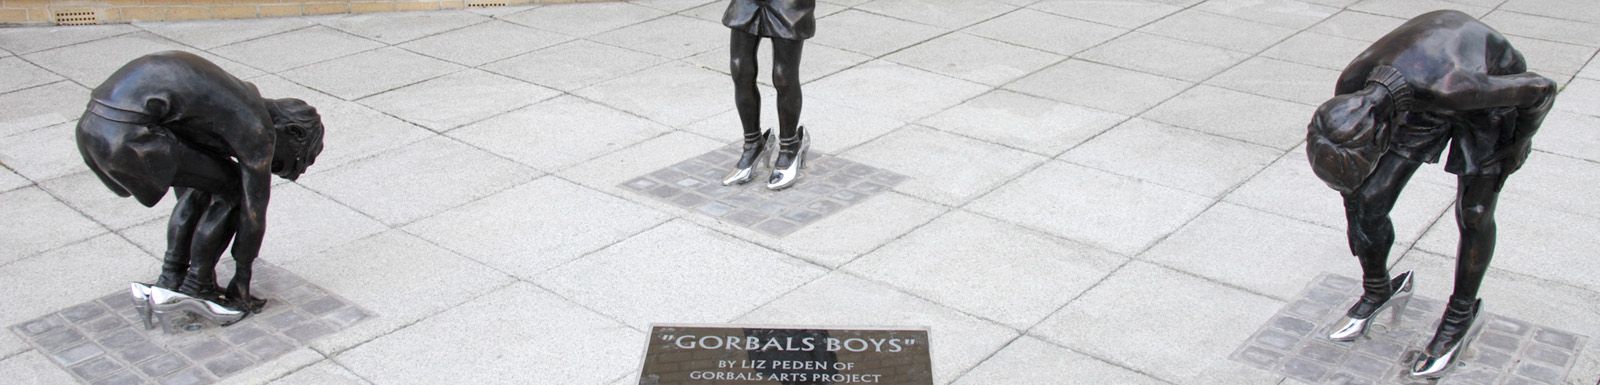 The Gorbals Boys sculpture in the Gorbals